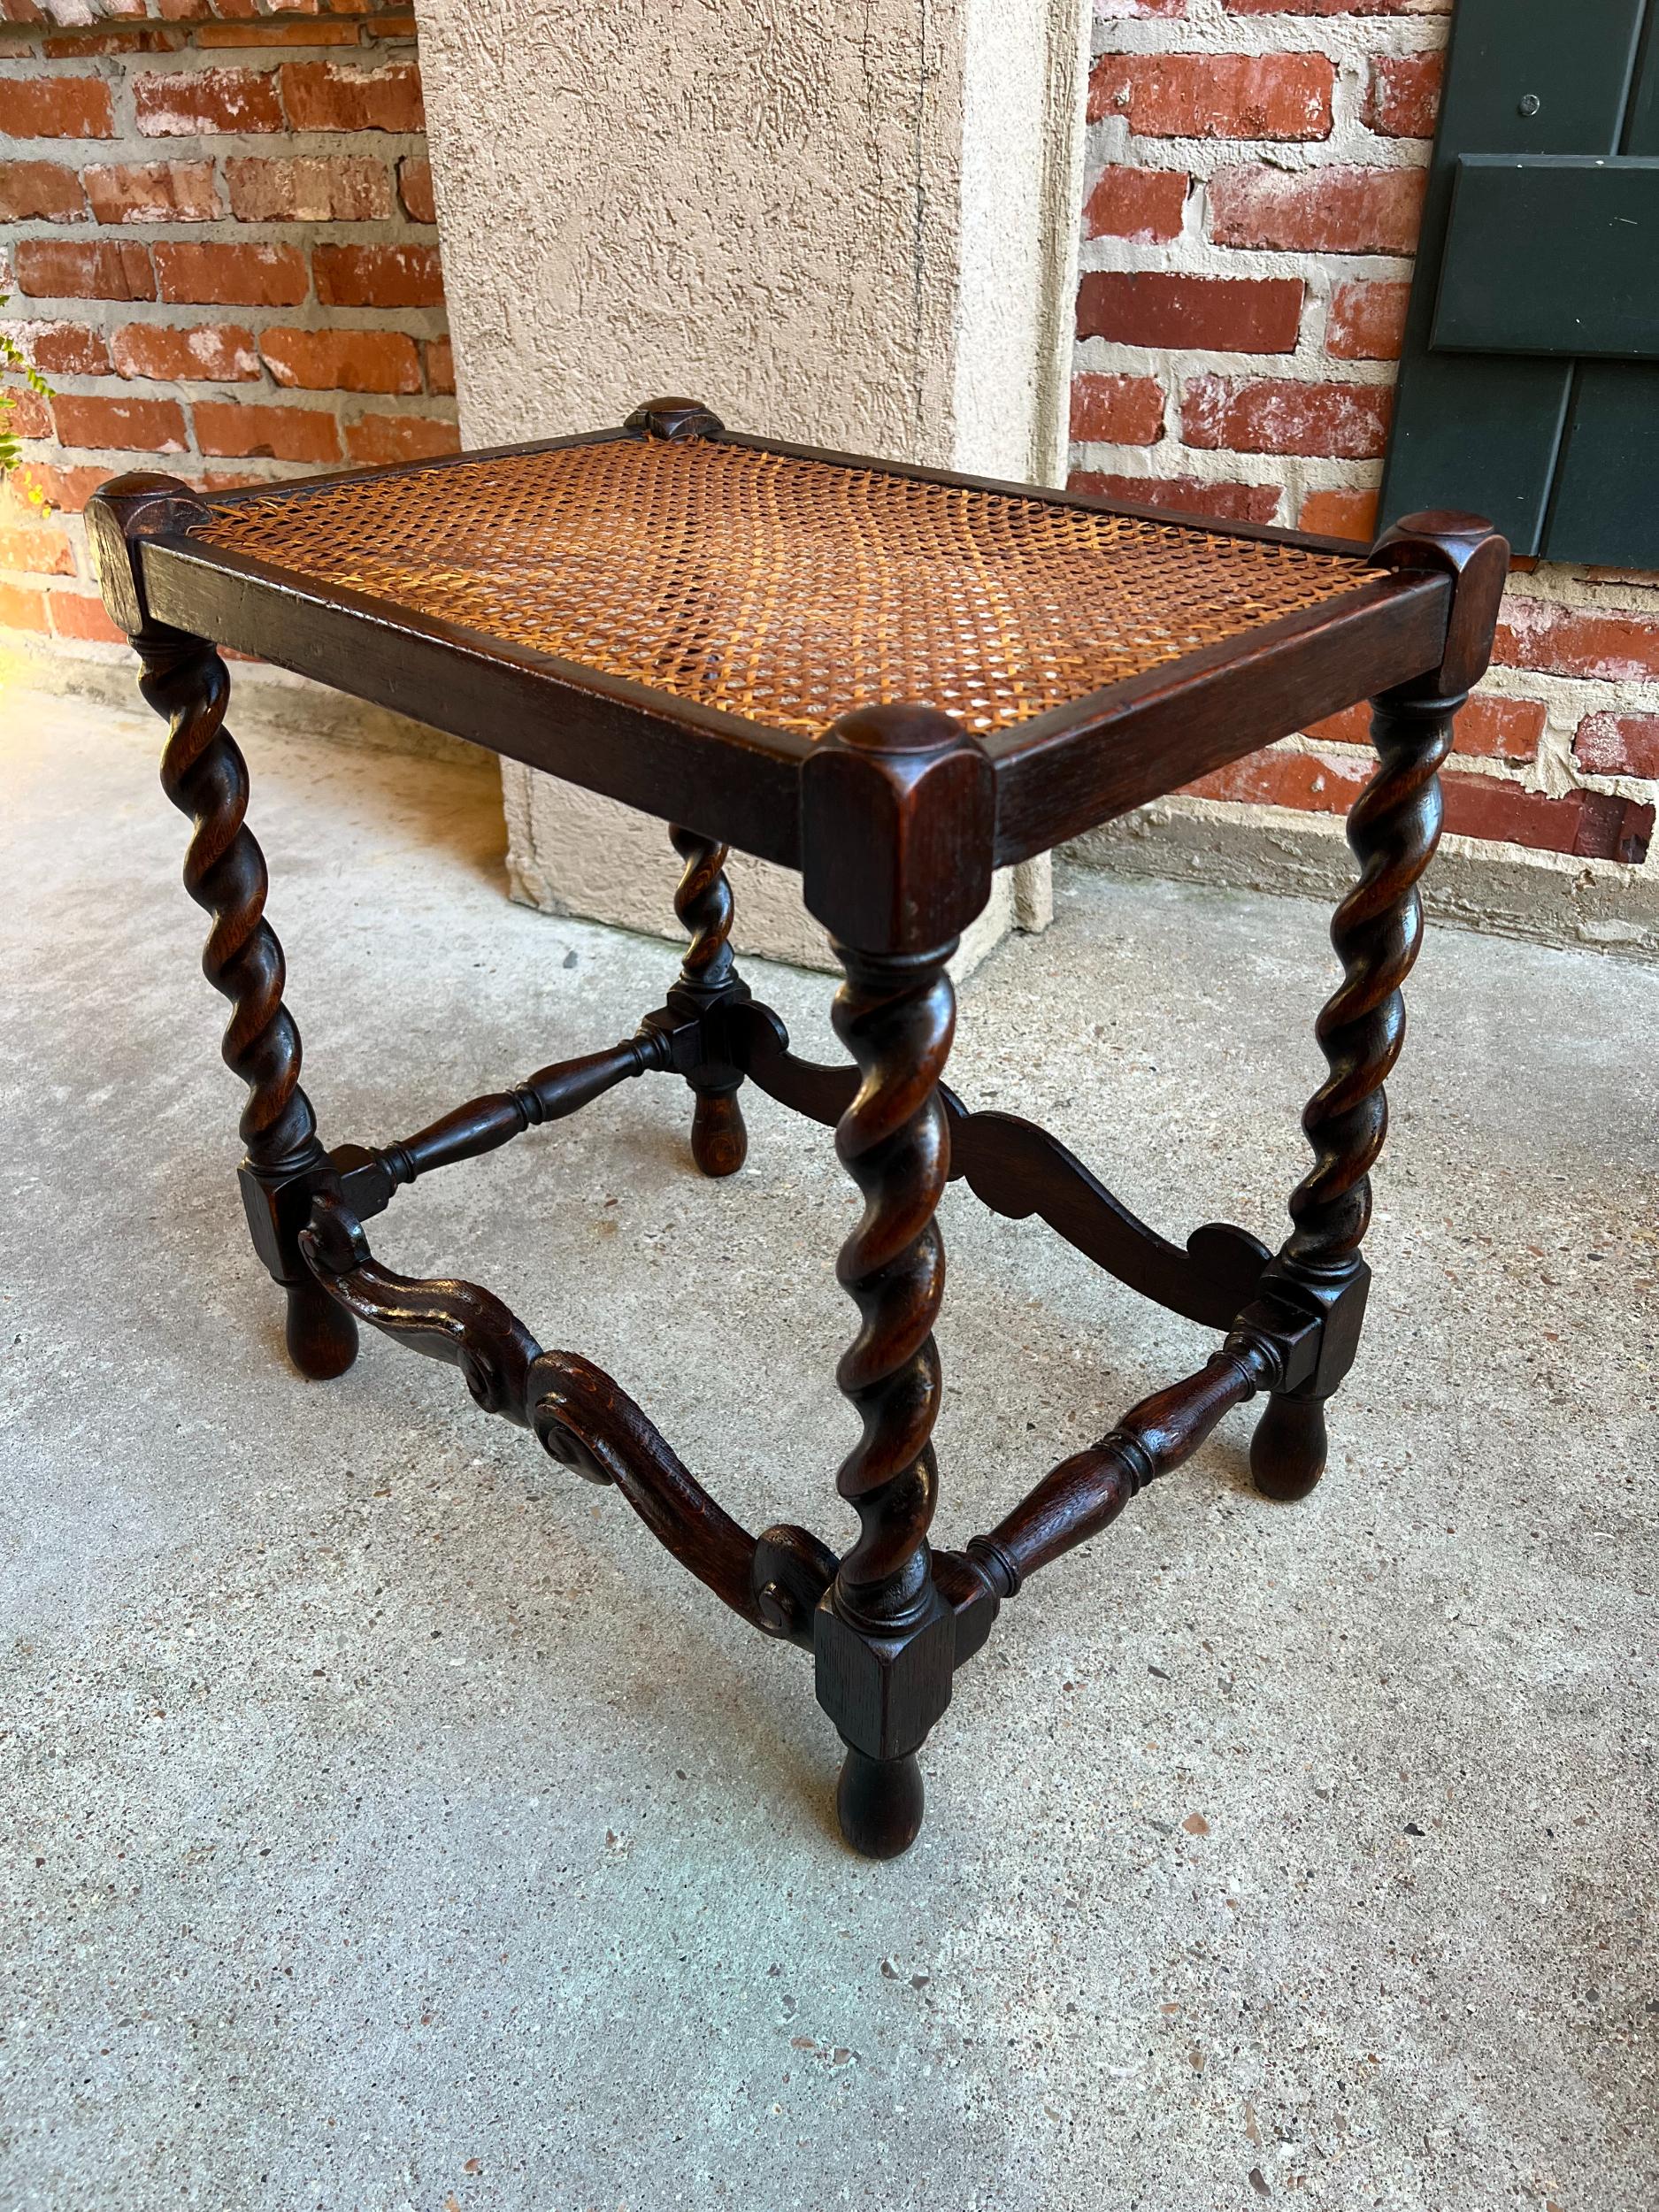 Antique English carved Oak Barley Twist bench stool Jacobean w Cane Top.

Direct from England, a wonderful antique English oak stool or bench.
Hand turned barley twist legs are joined by serpentine carved stretchers to the front and back, with